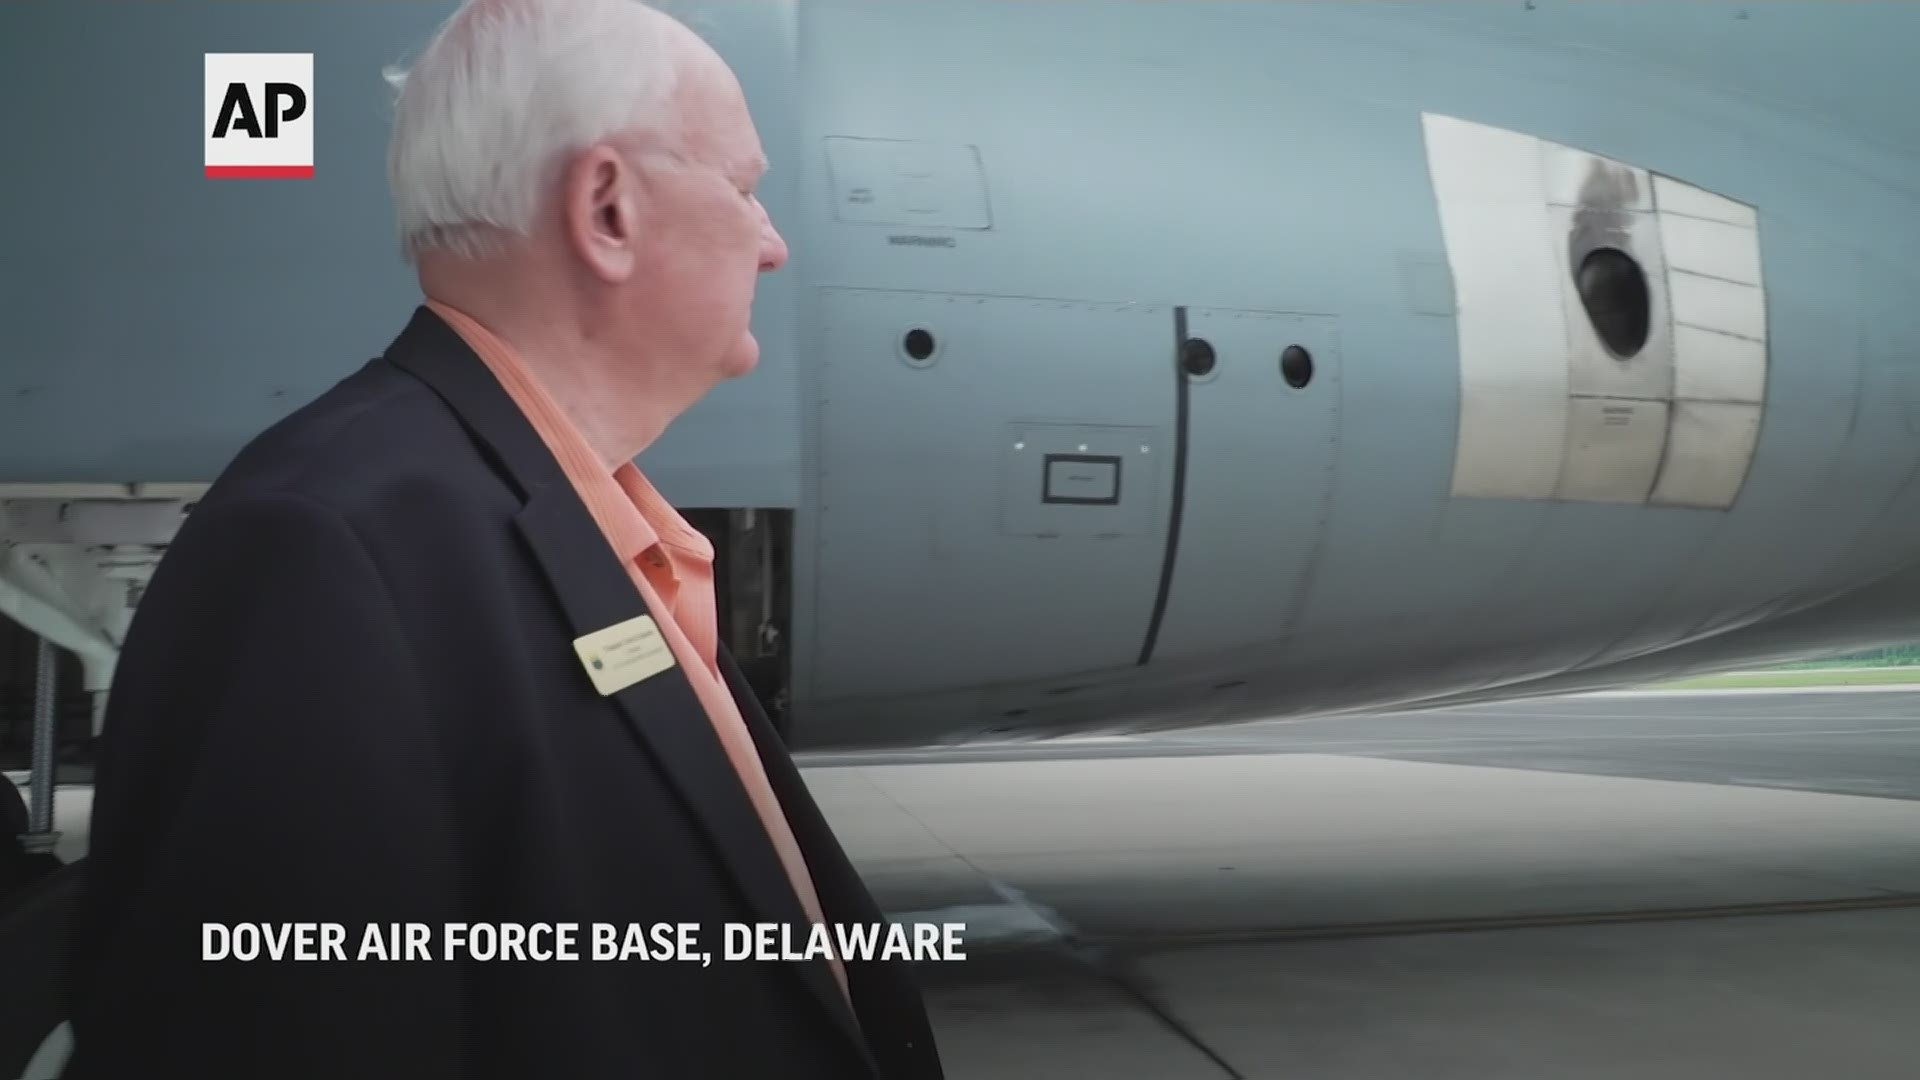 Virtually all of the Afghan war’s dead came back through Dover Air Force Base. Chaplain David Sparks was there through the decades-long conflict.